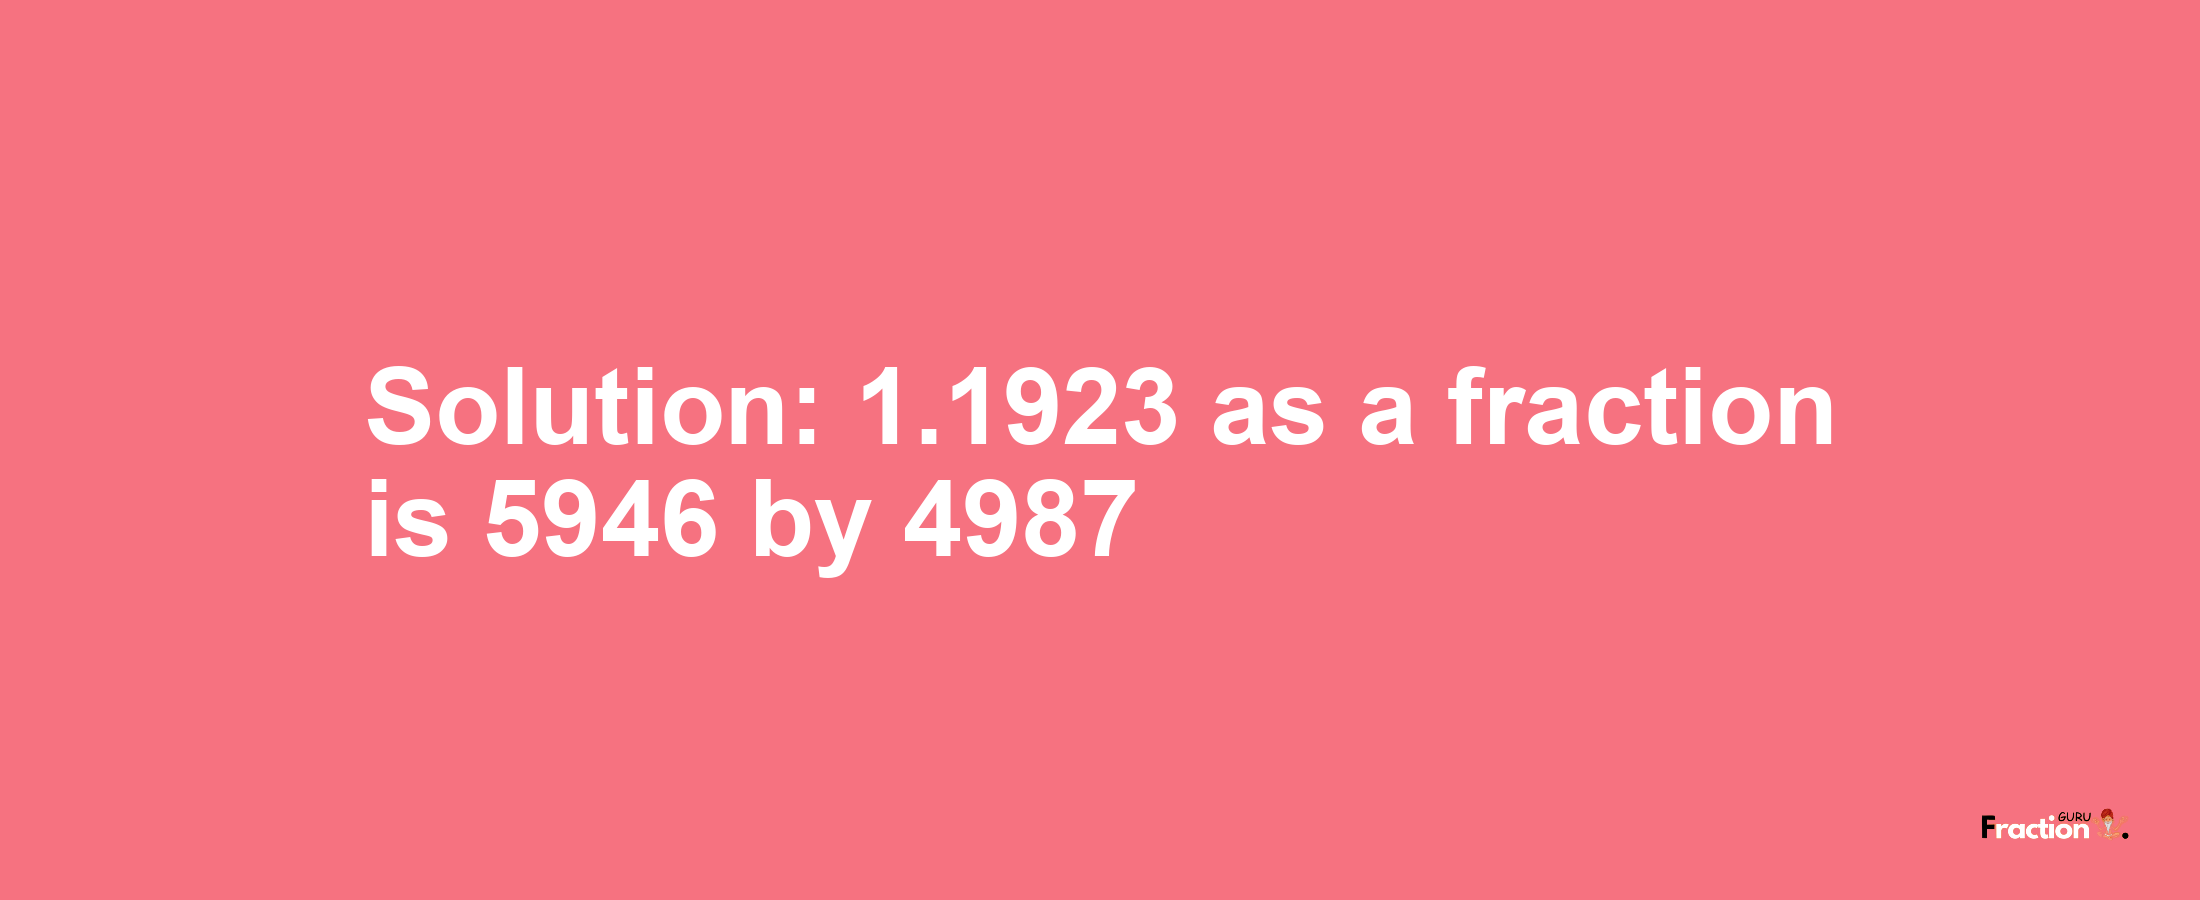 Solution:1.1923 as a fraction is 5946/4987